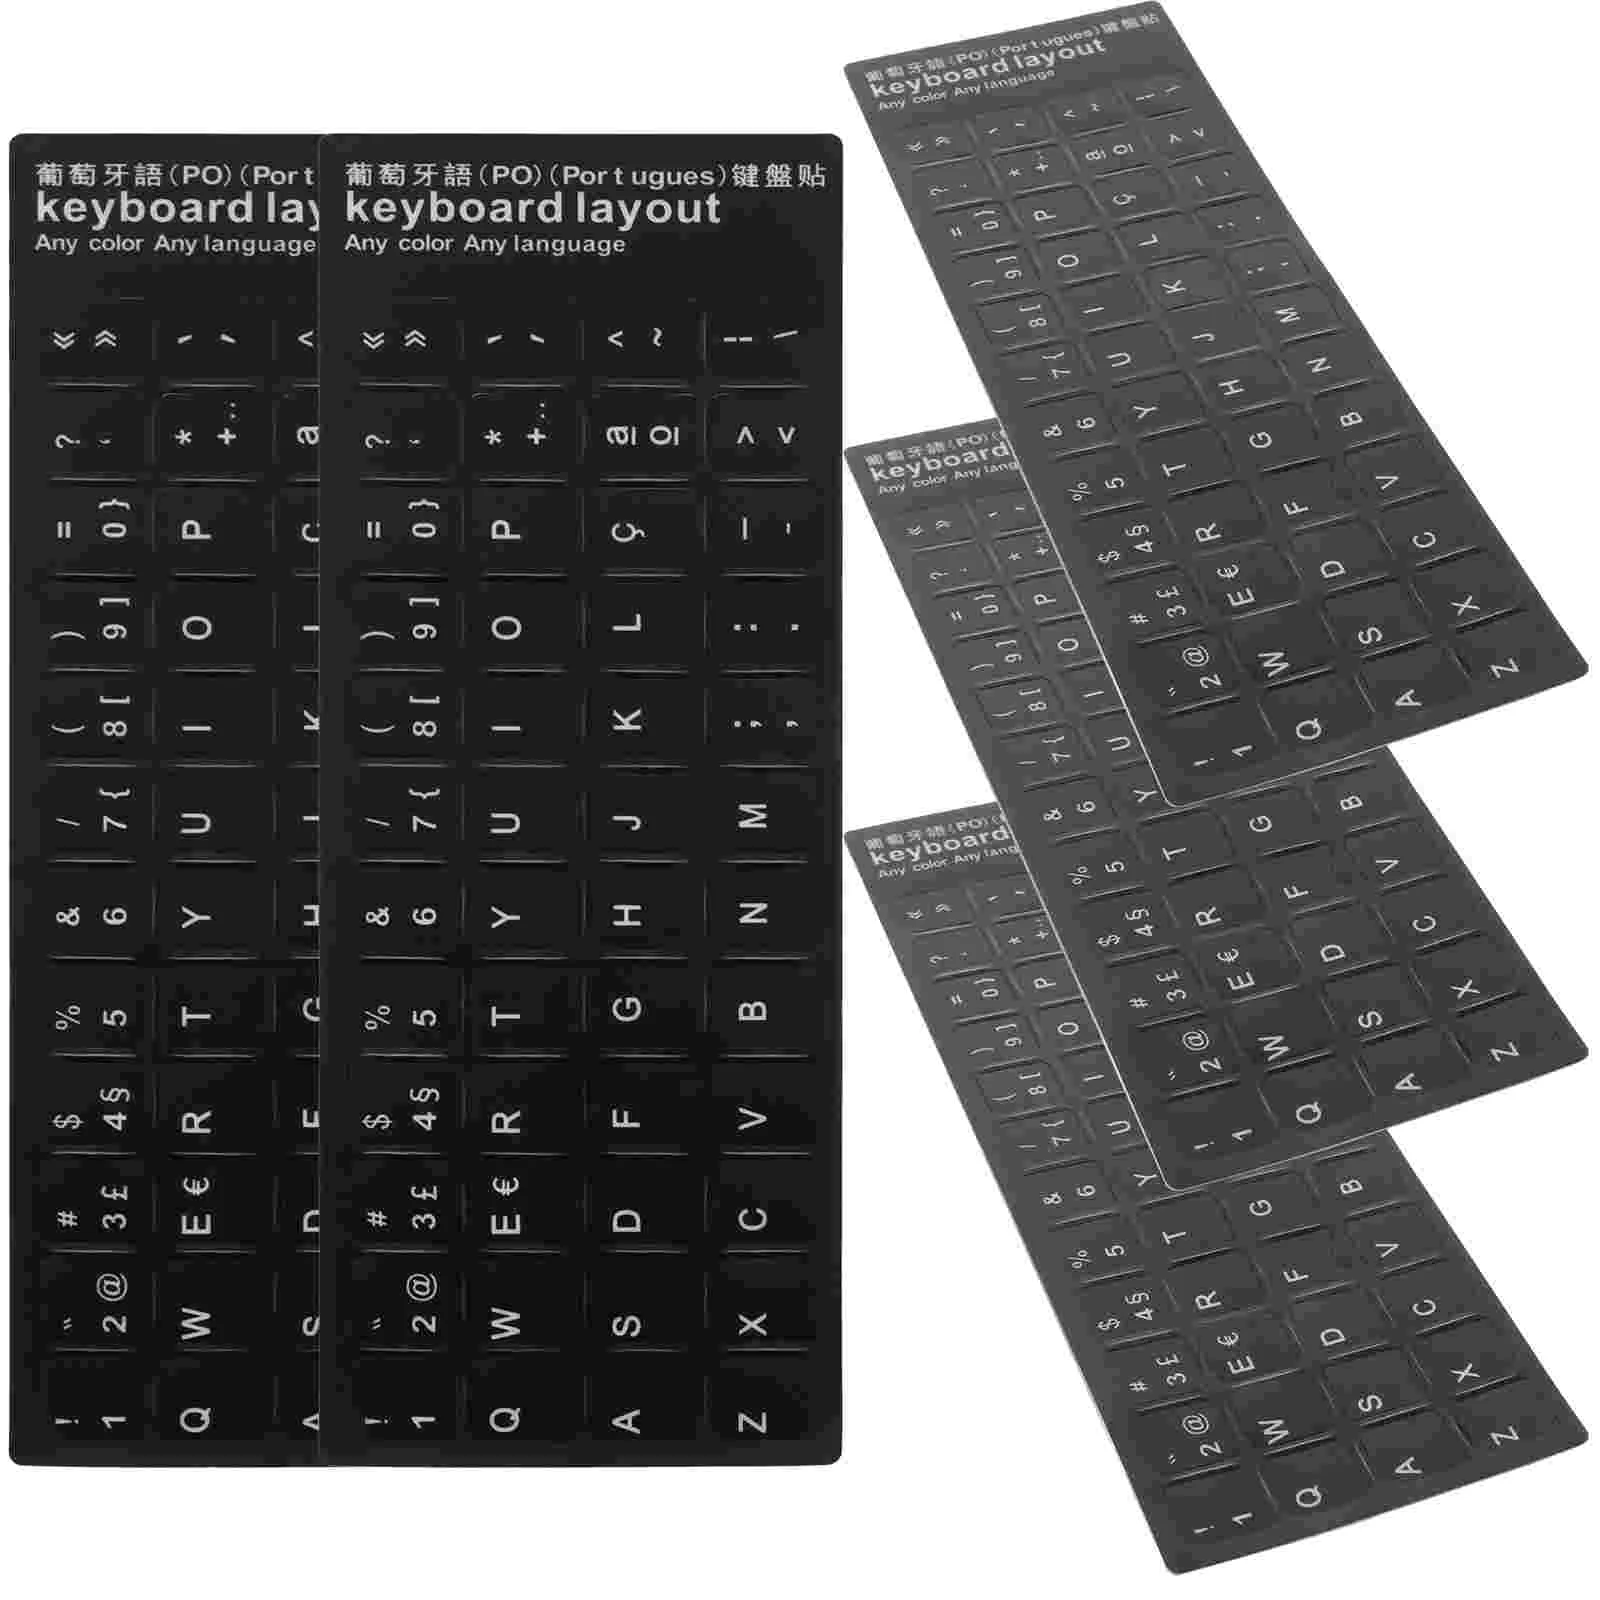 10 Pcs Keyboard Computer Keyboard Skin Cover Wireless Keyboardations Students Gift Layout Pvc Foreign Language Laptop Computer